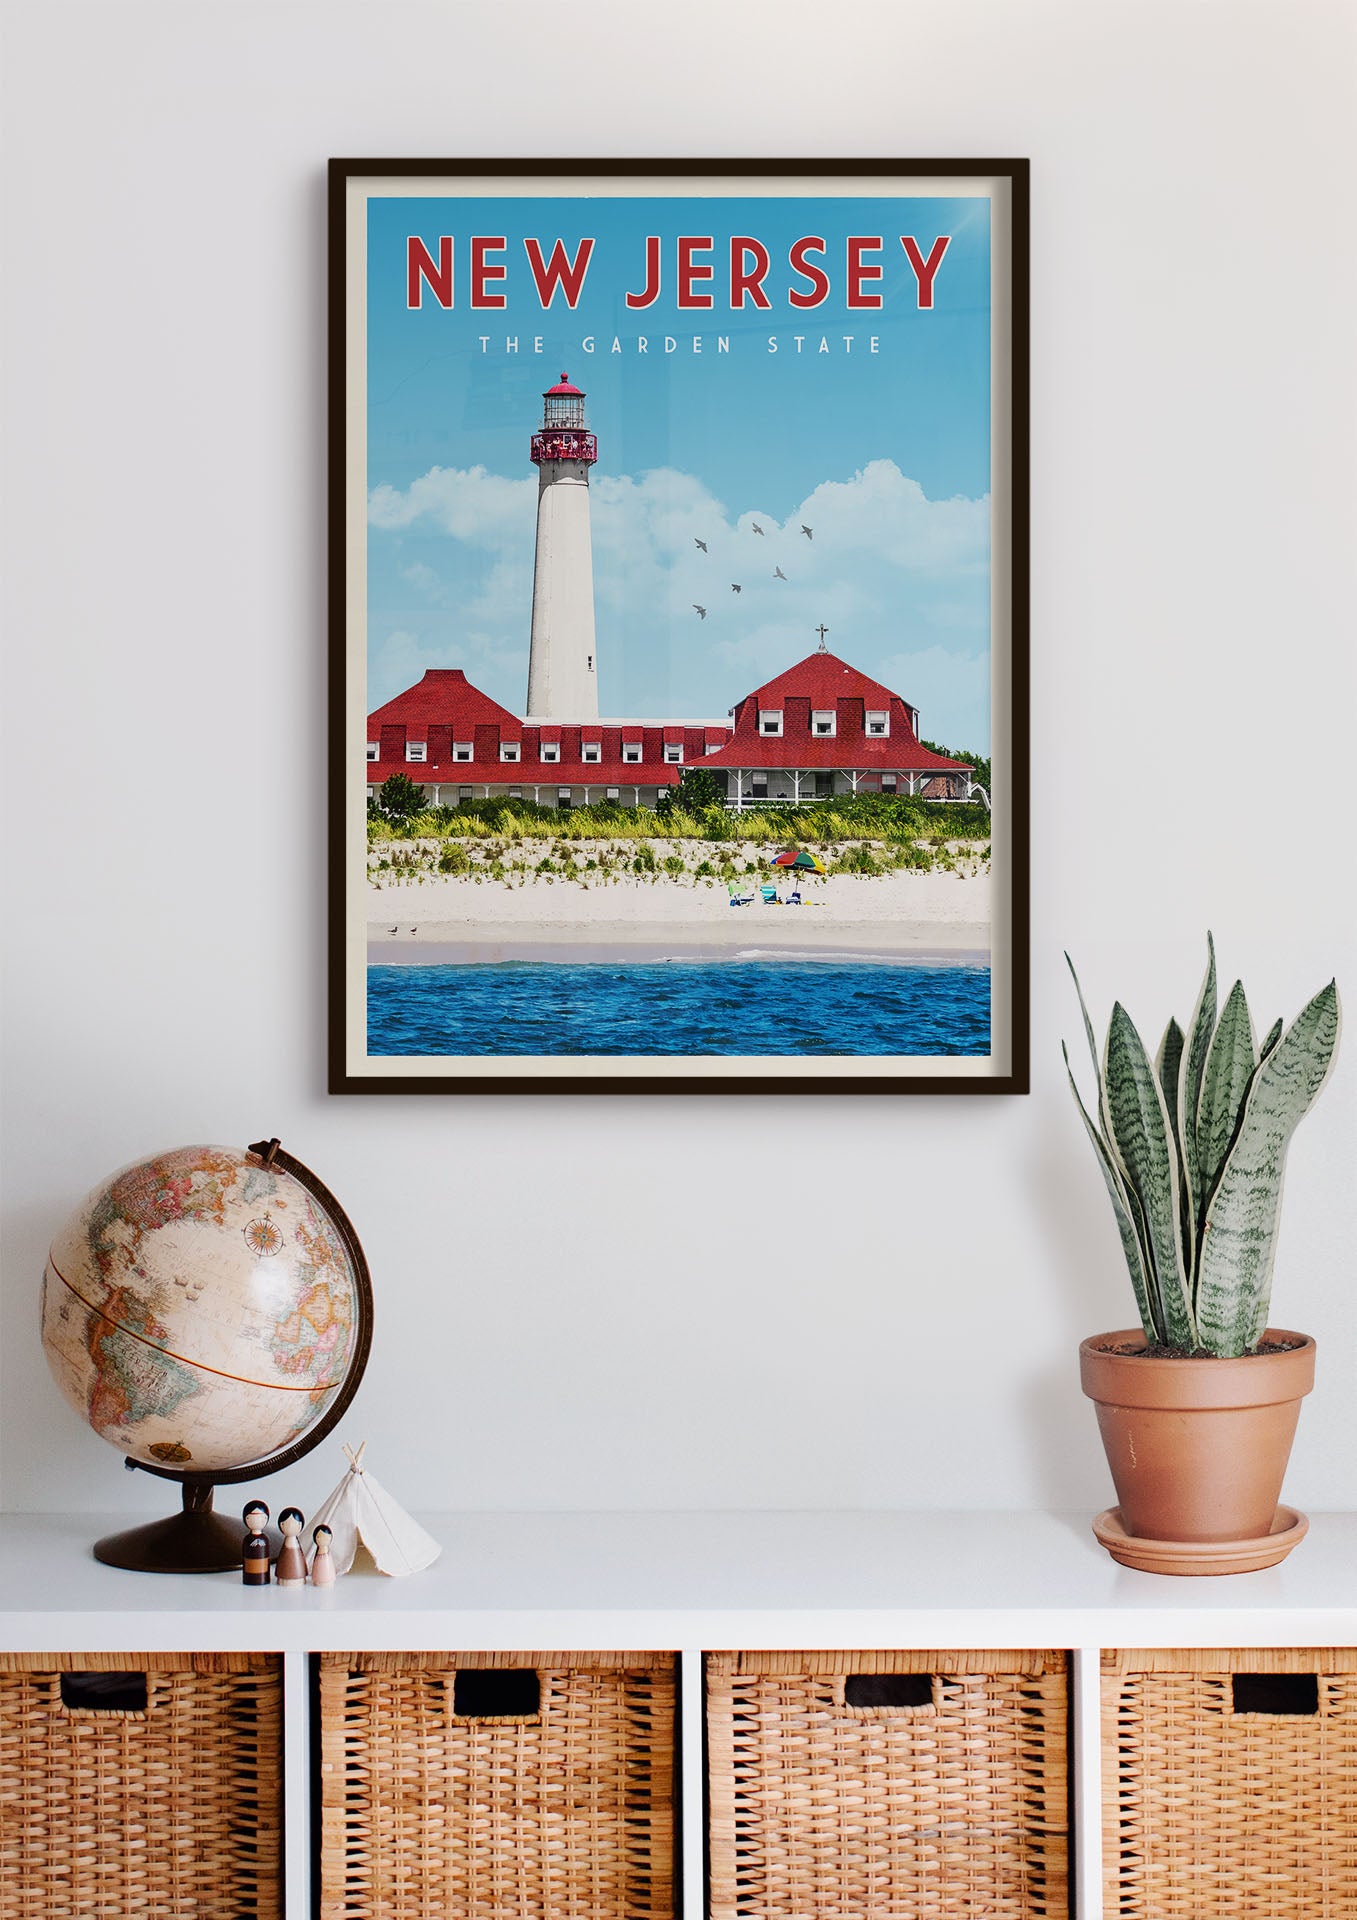 New Jersey - Vintage Travel Poster